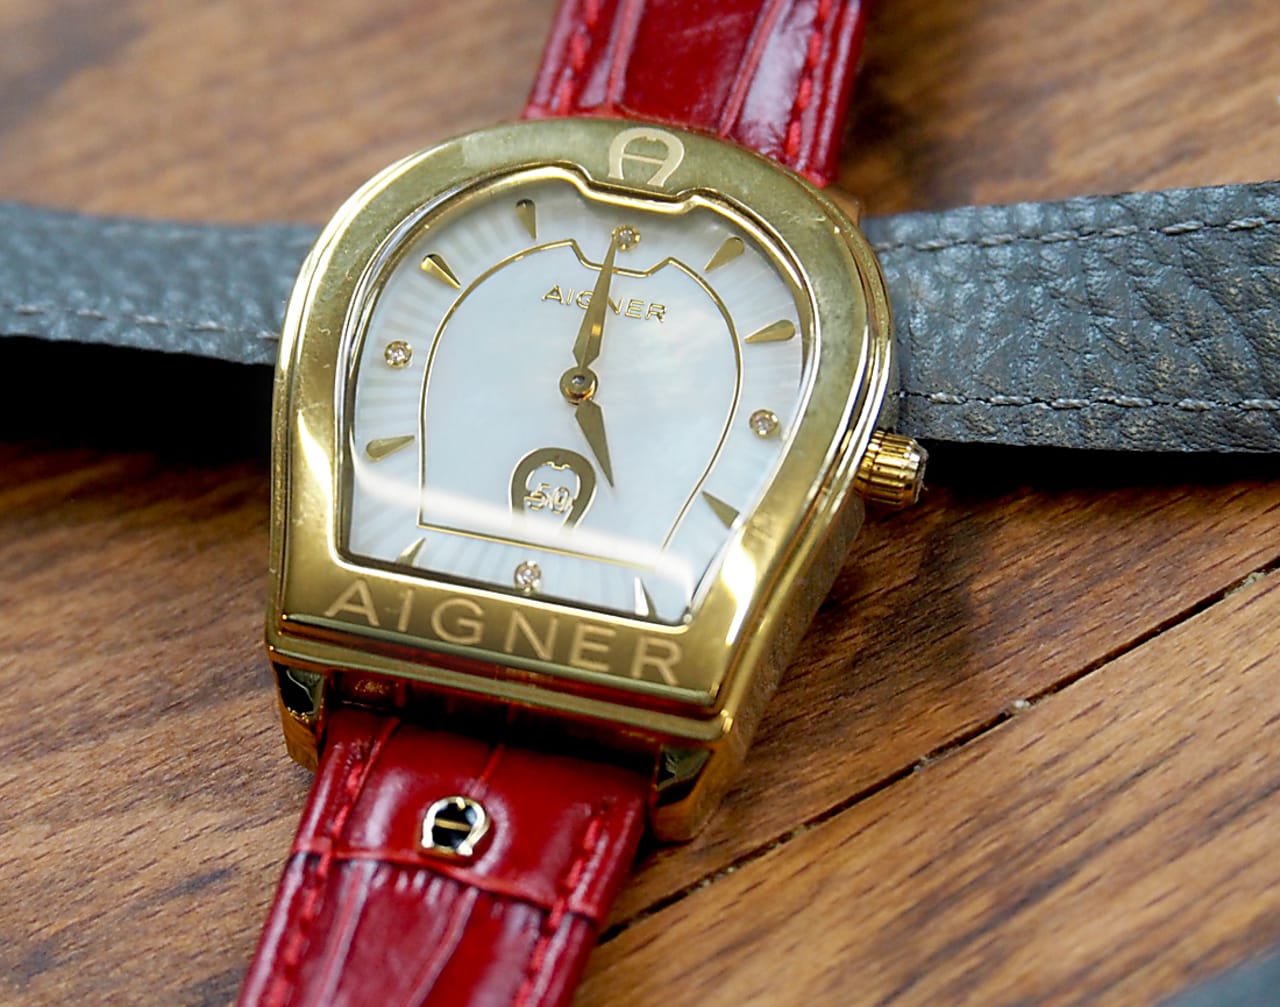 With our hands and tradition in mind - AIGNER